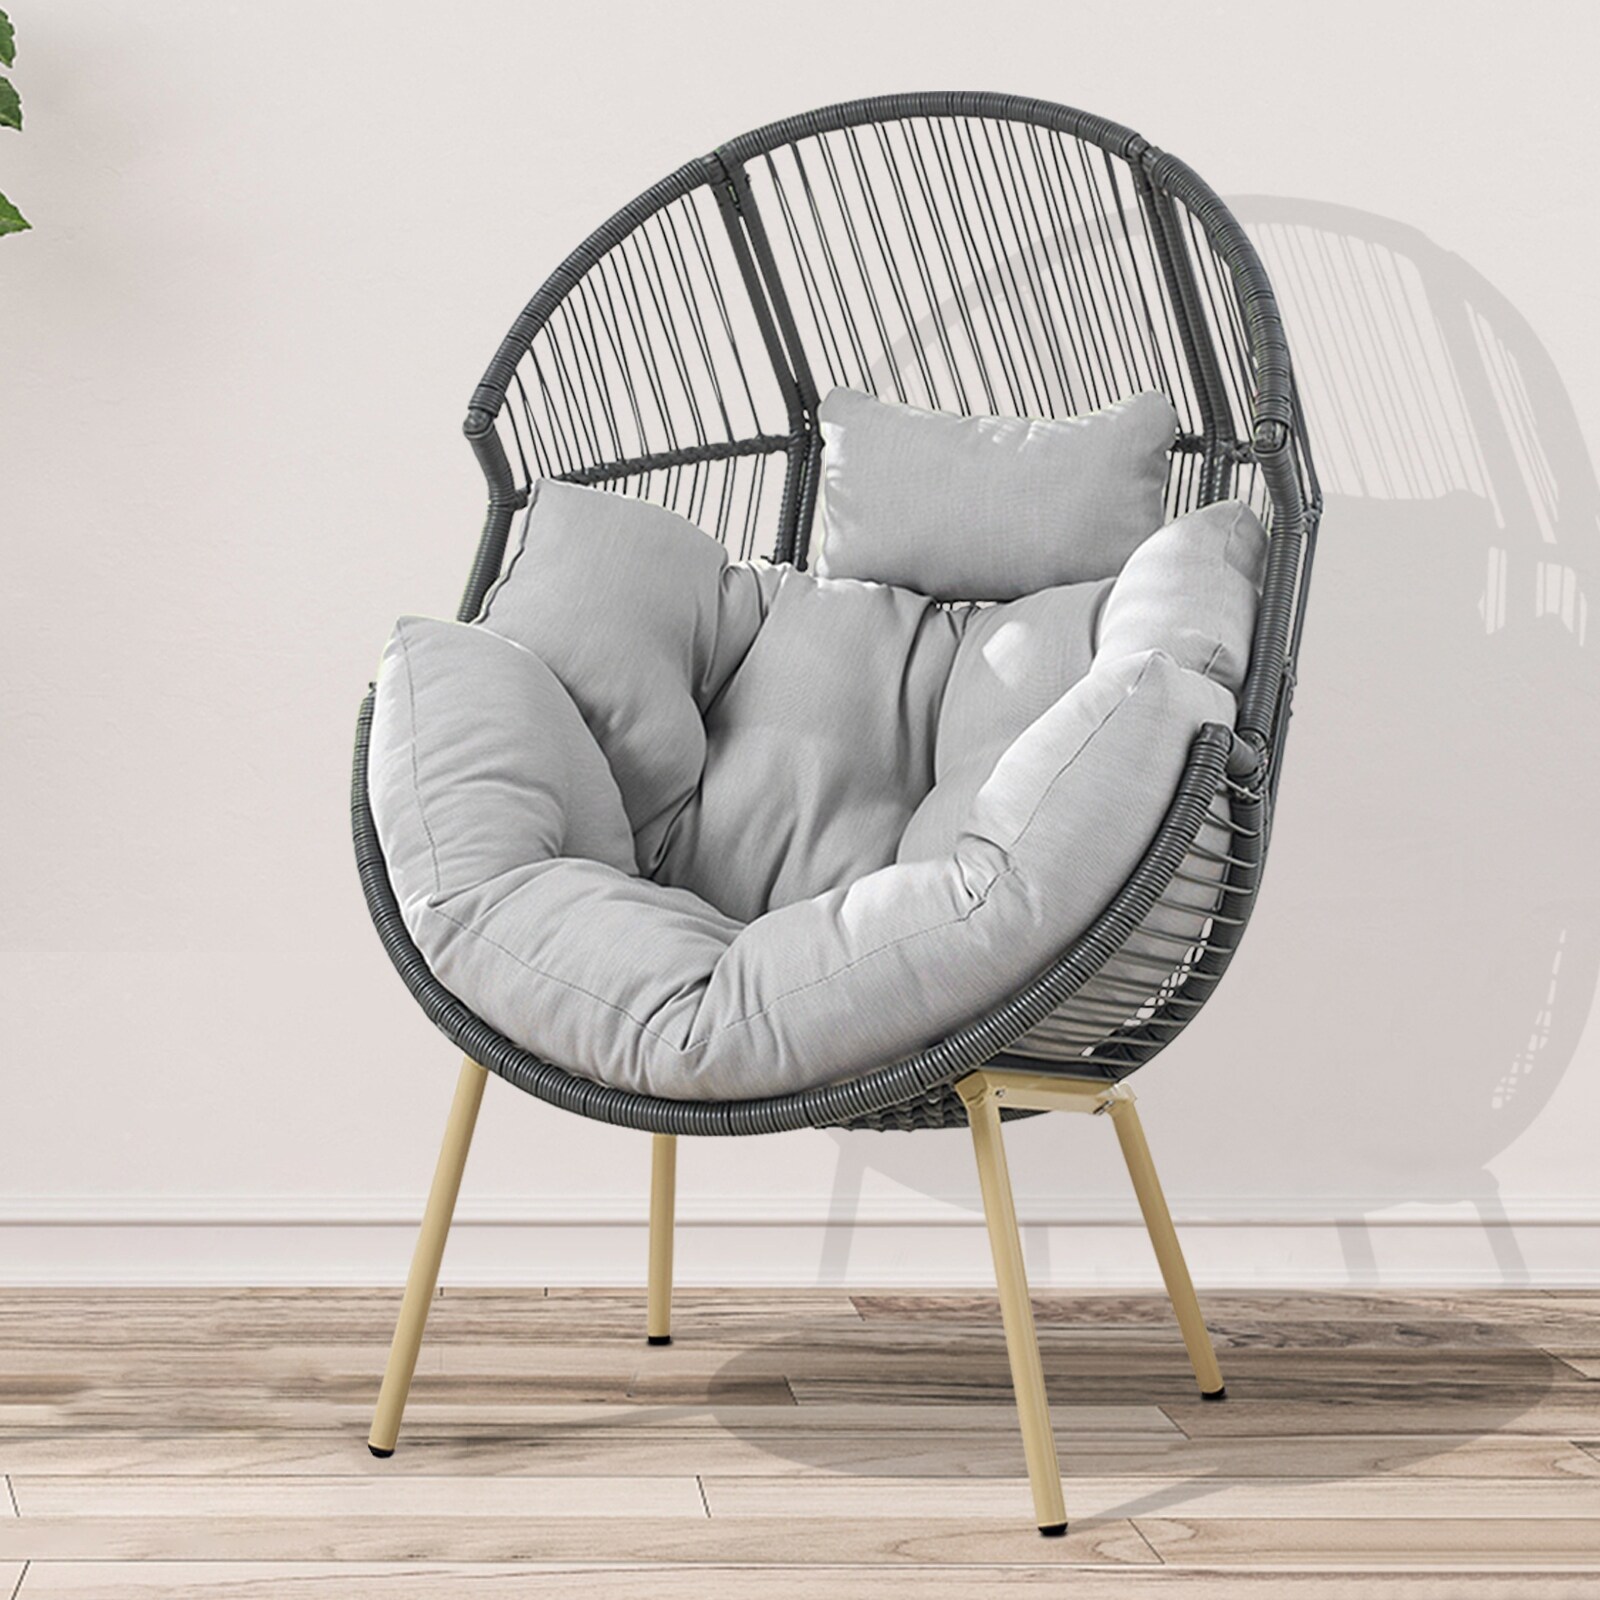 https://ak1.ostkcdn.com/images/products/is/images/direct/264cf9349d0b5d263a4a14cc98fc85d03f0527d2/Outdoor-Egg-Chair-with-Cushion-Oversized-Egg-Chair.jpg